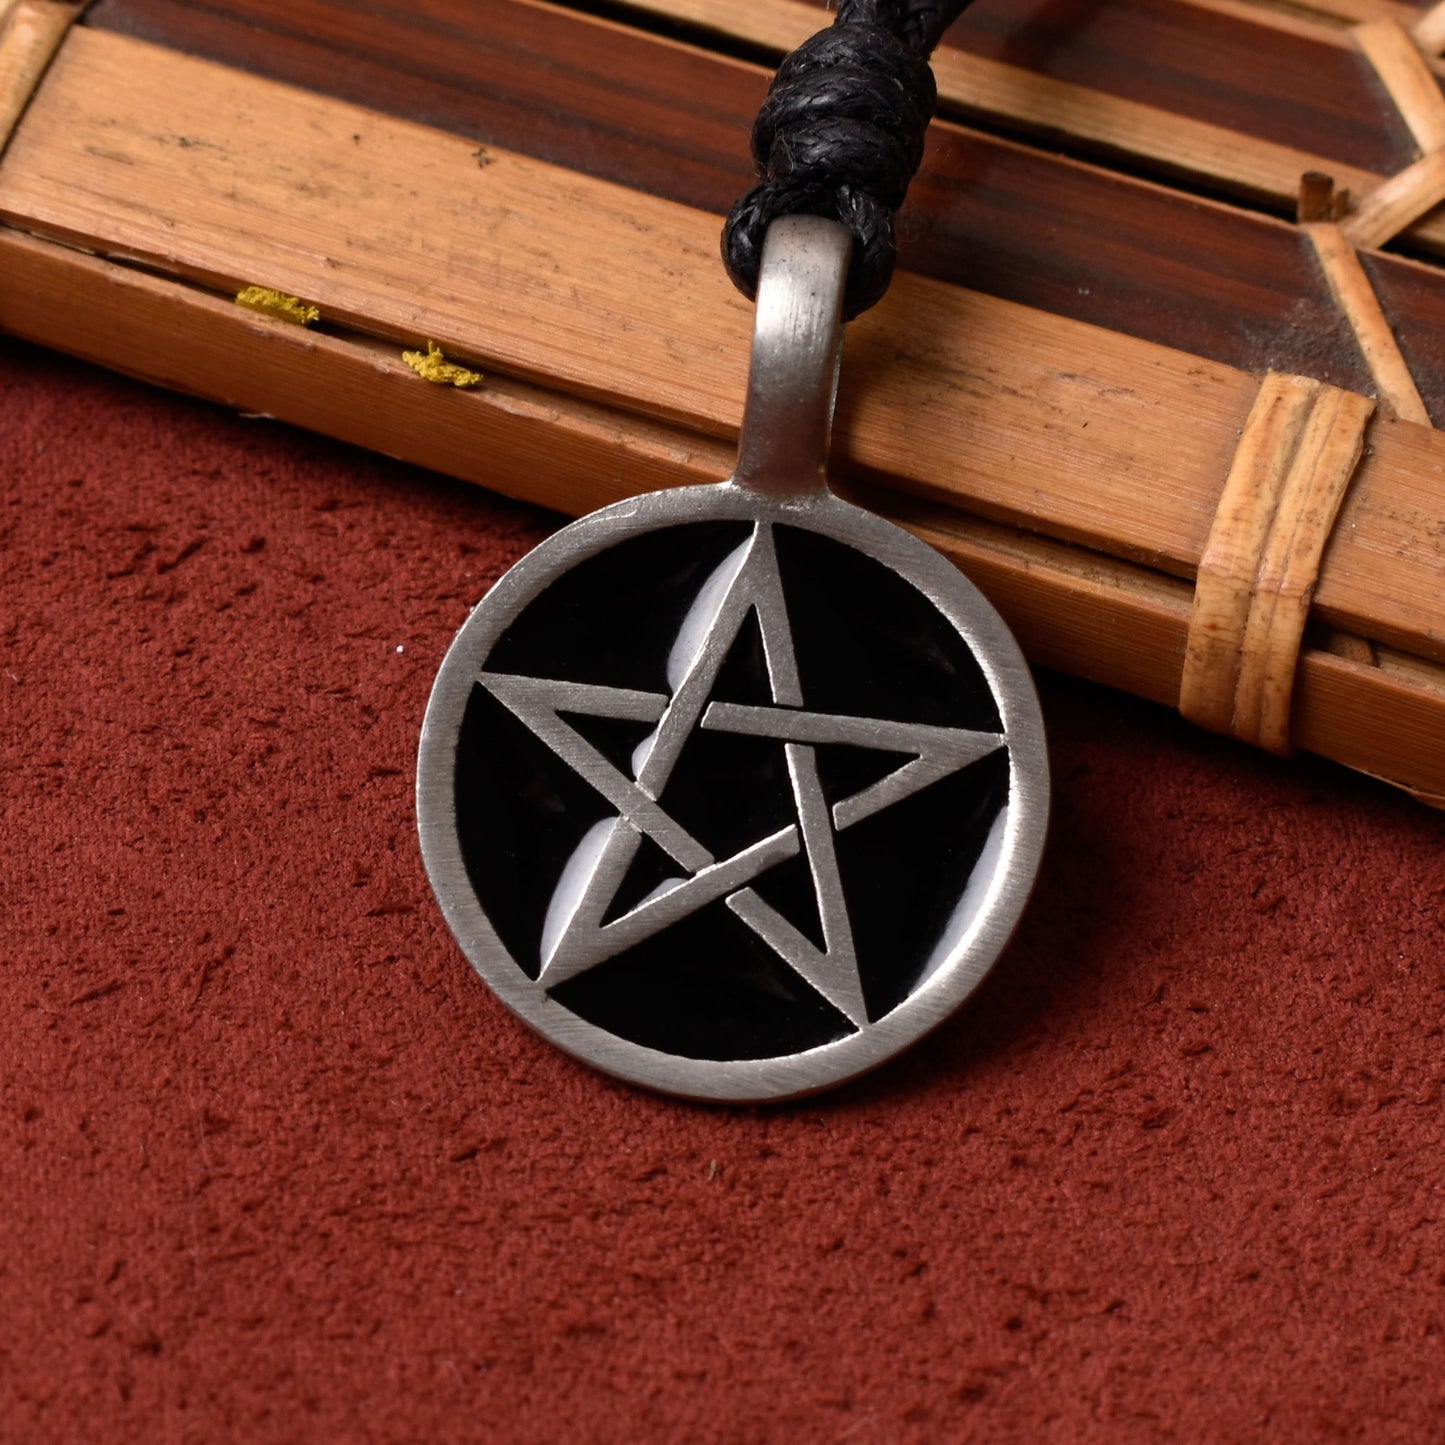 Cute Handmade Five-pointed Star Silver Pewter Charm Necklace Pendant Jewelry